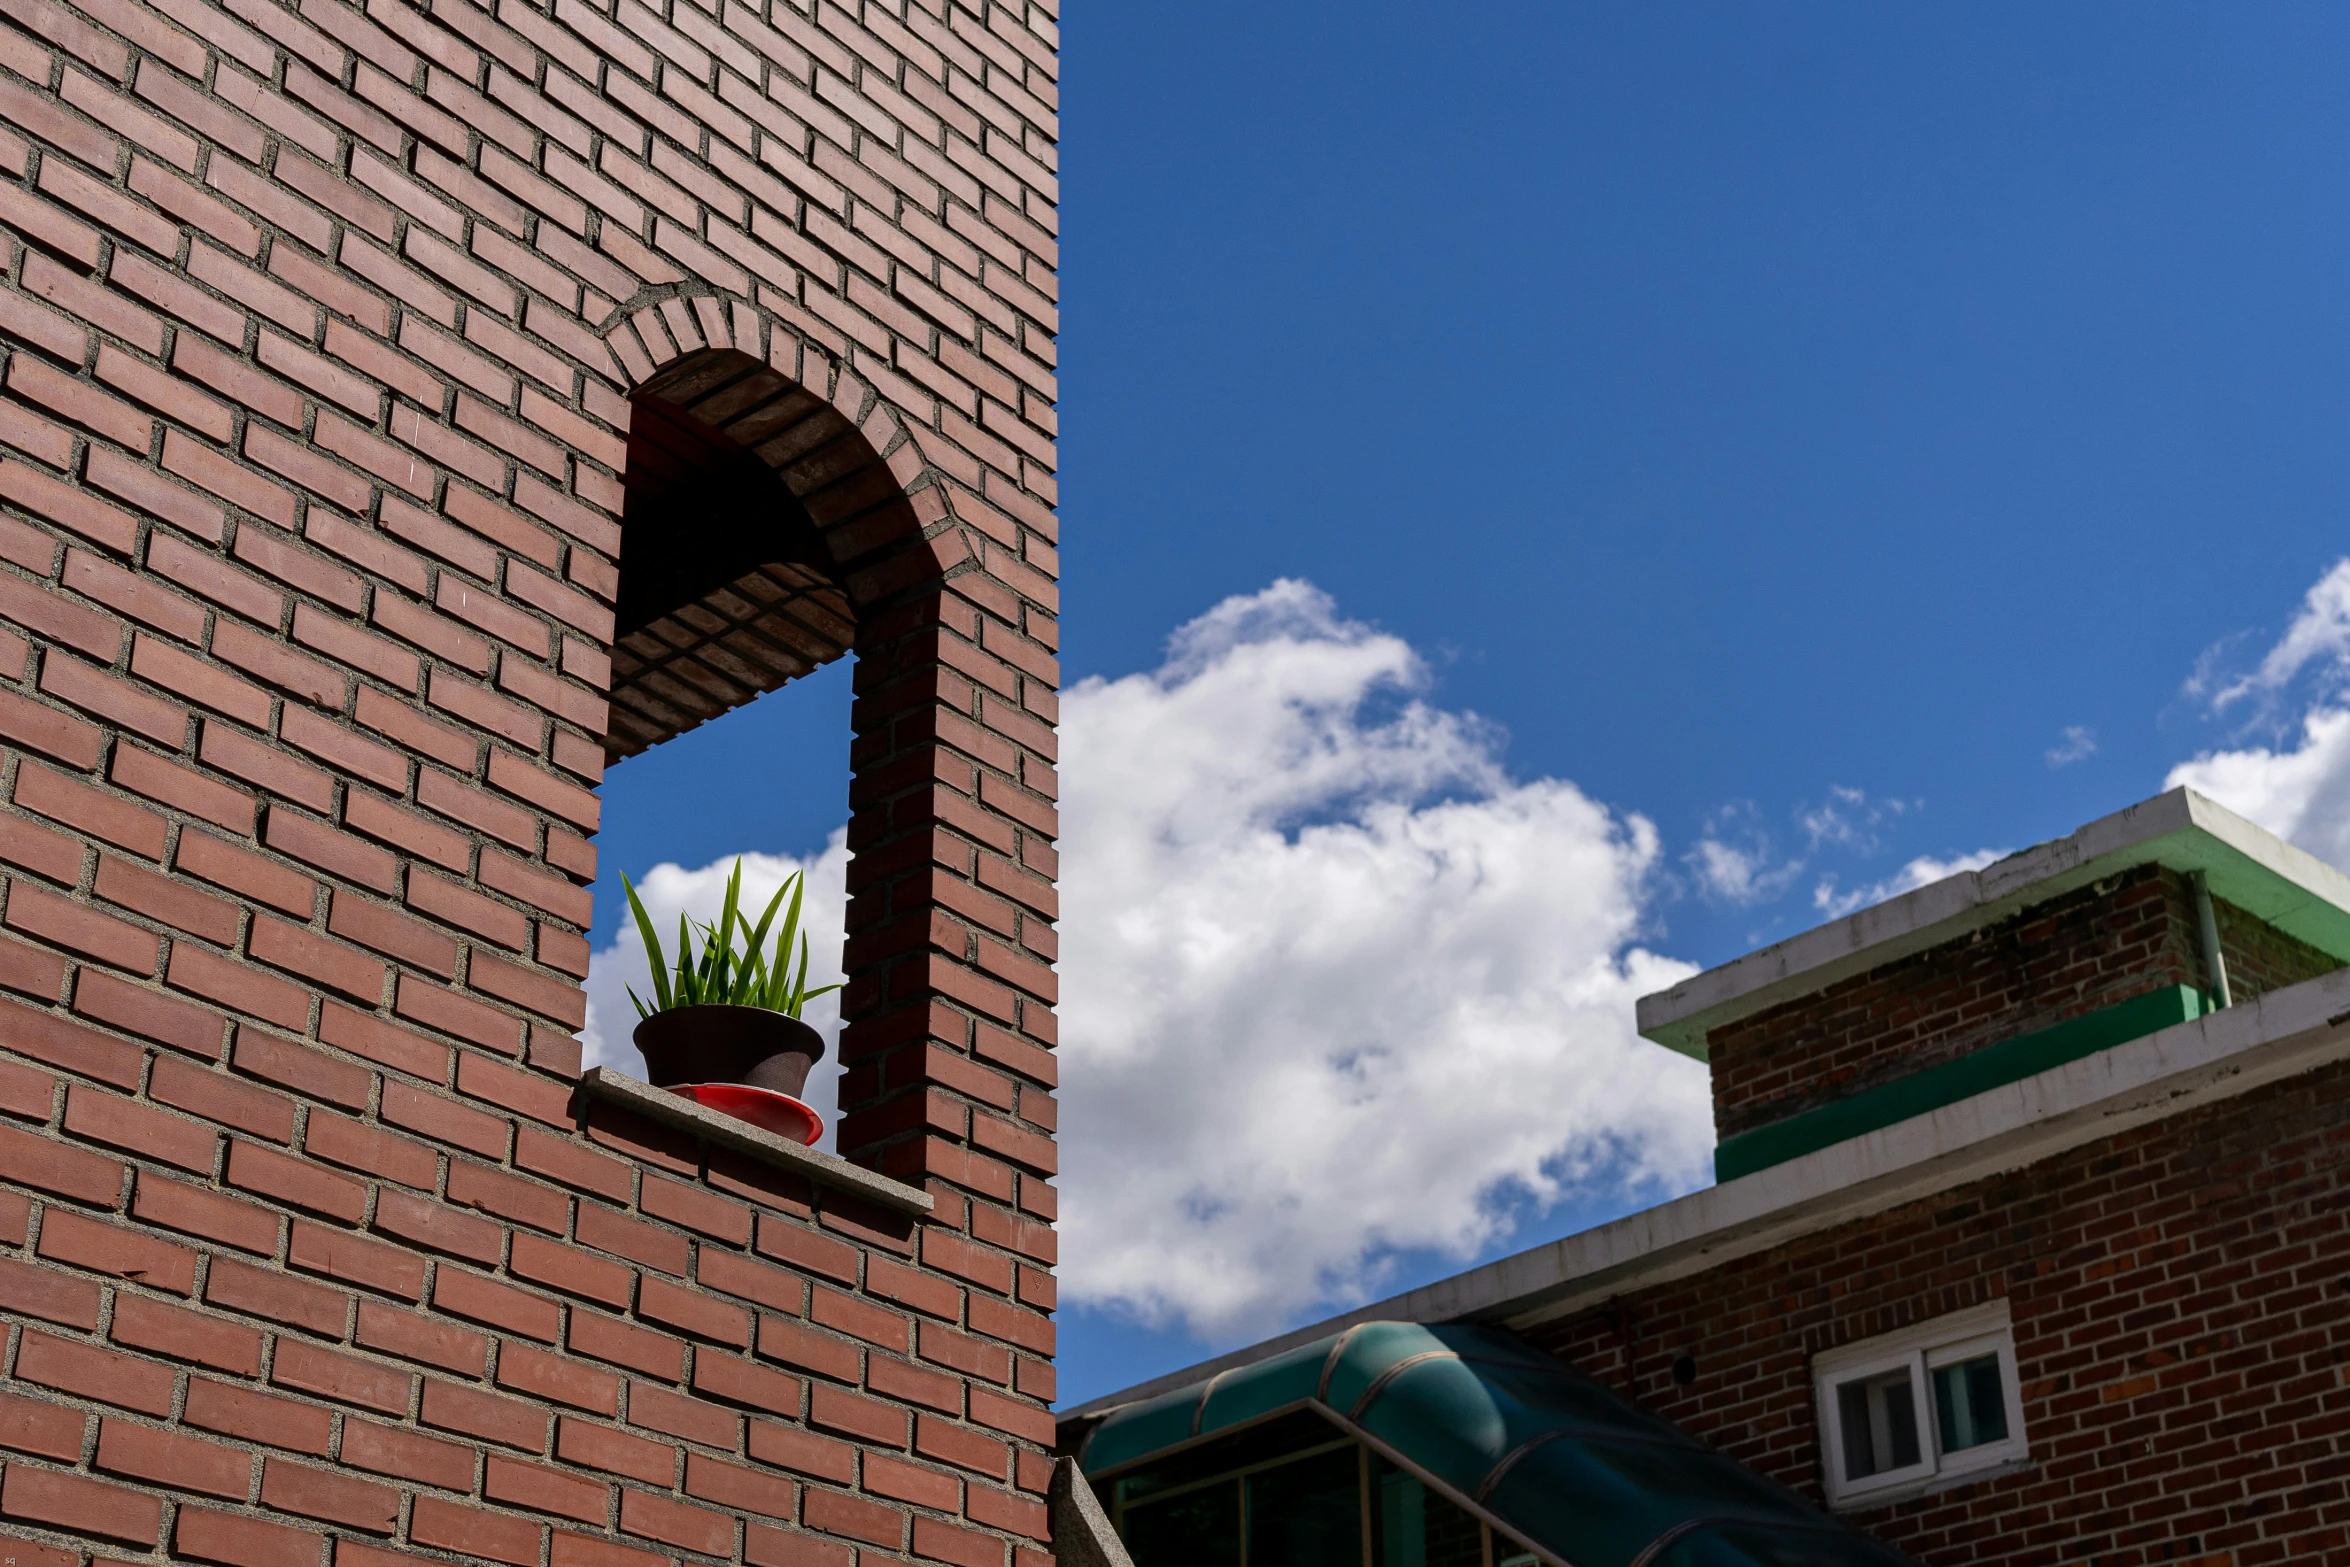 a brick building with a brick window and brick planter on one side of the window